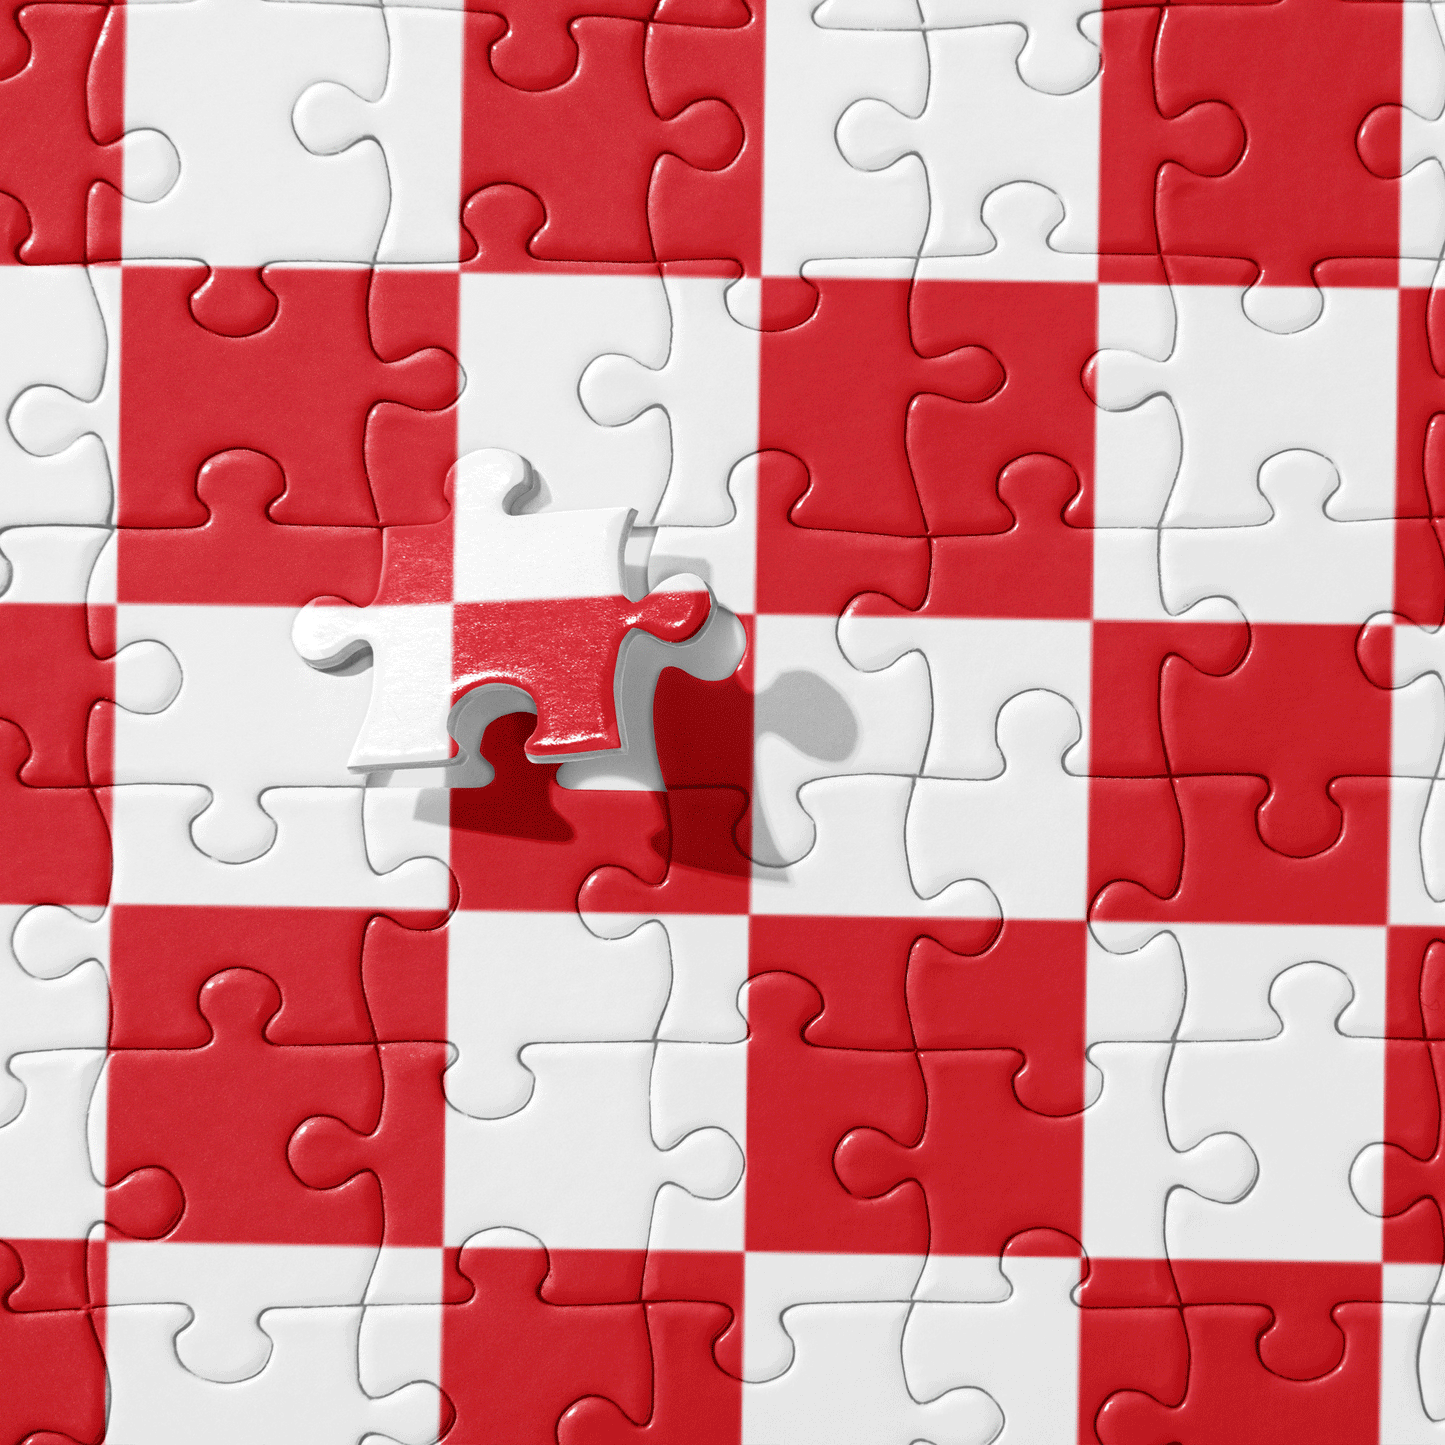 WONKY CHECKED SPLATTERED JIGSAW PUZZLE in RED